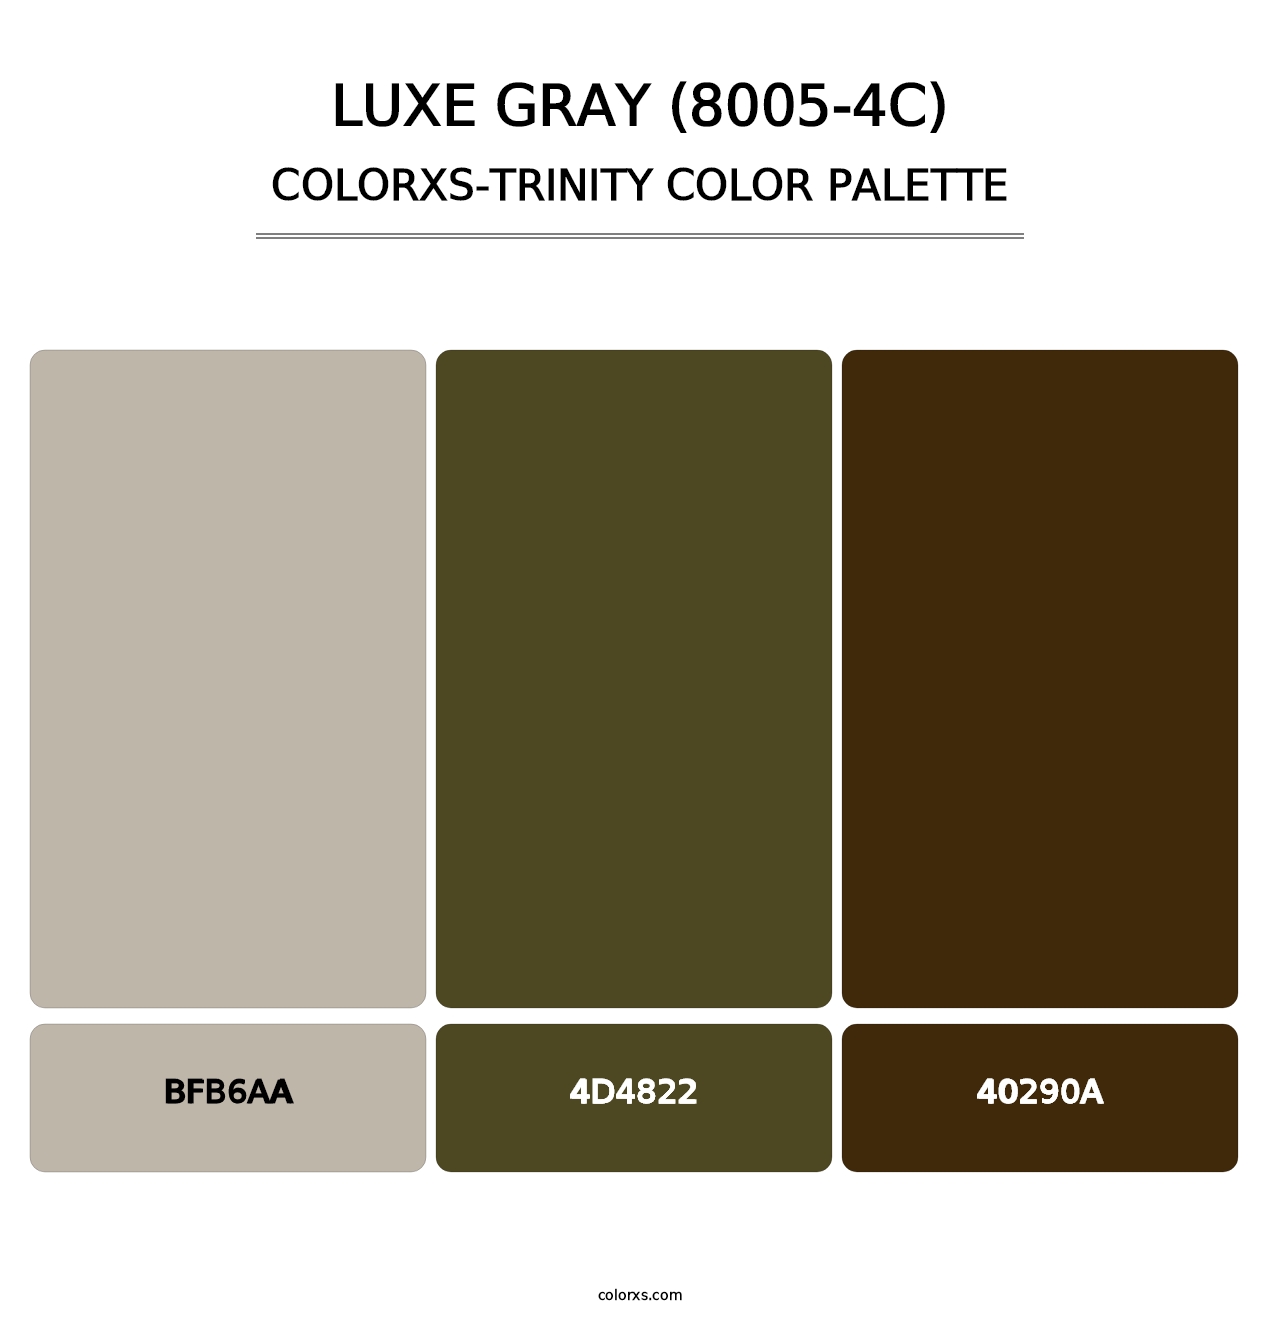 Luxe Gray (8005-4C) - Colorxs Trinity Palette